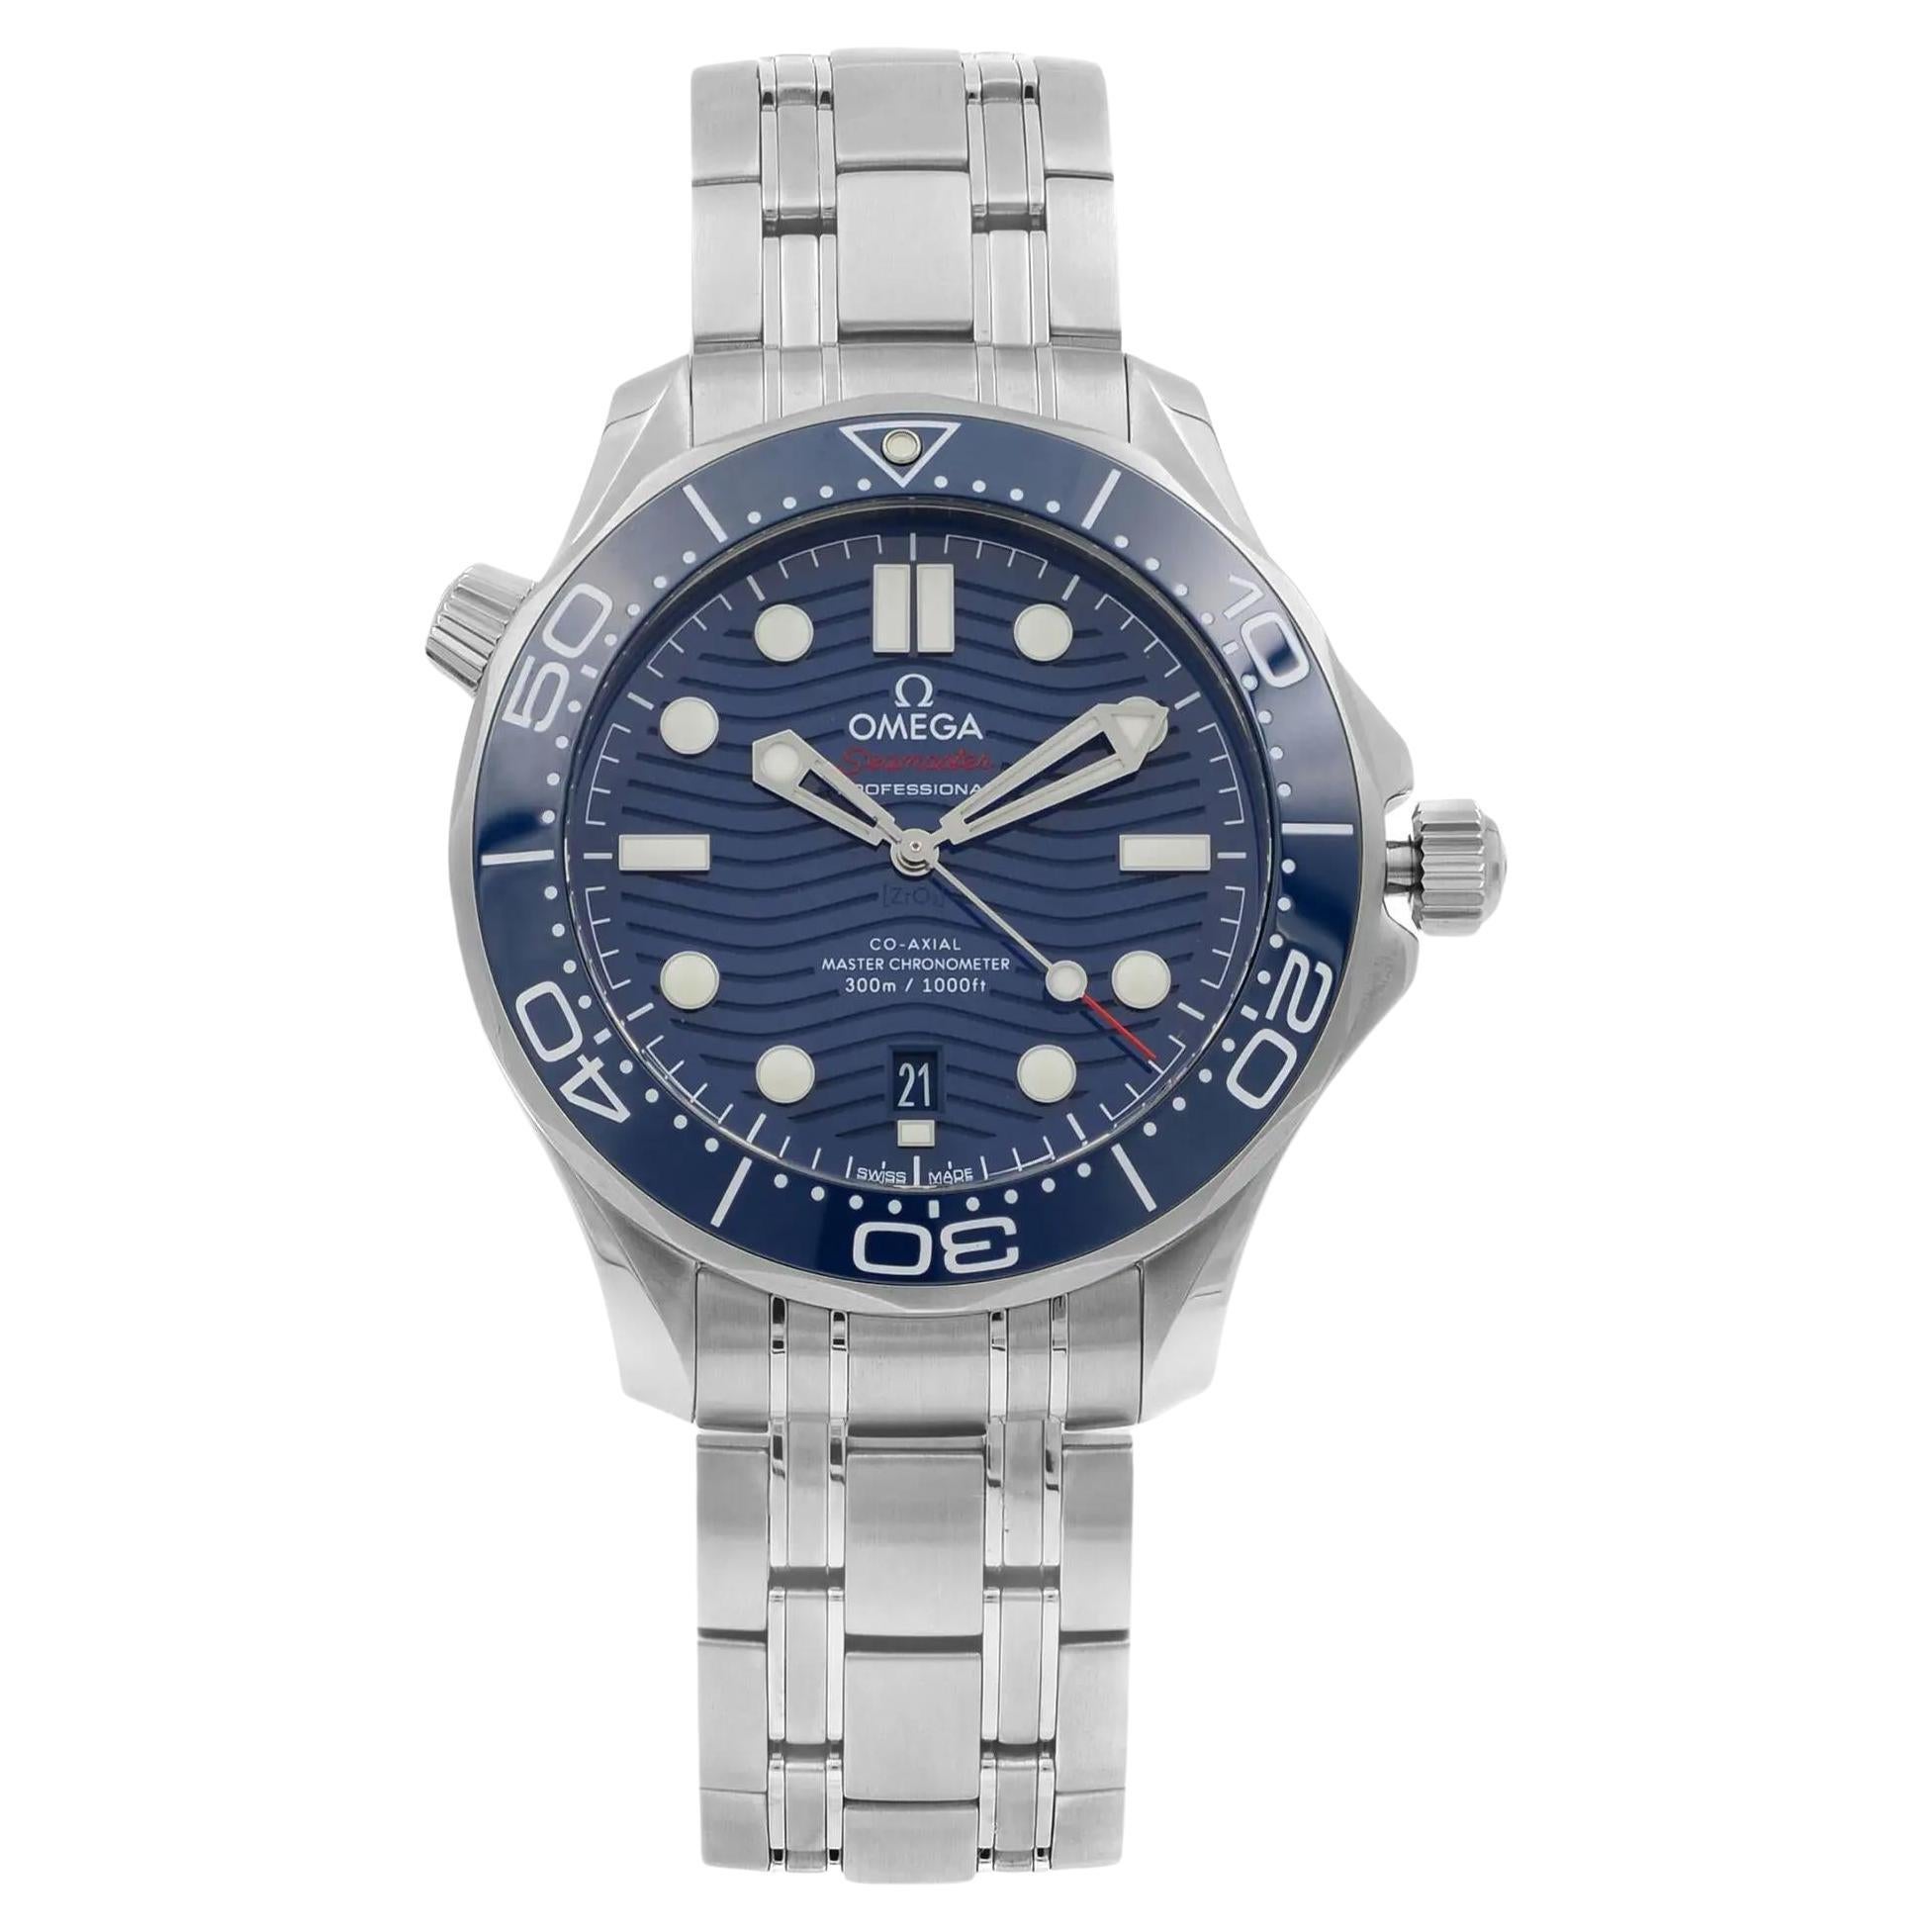 Omega Seamaster Diver 300M Steel Blue Dial Automatic Watch 210.30.42.20.03.001